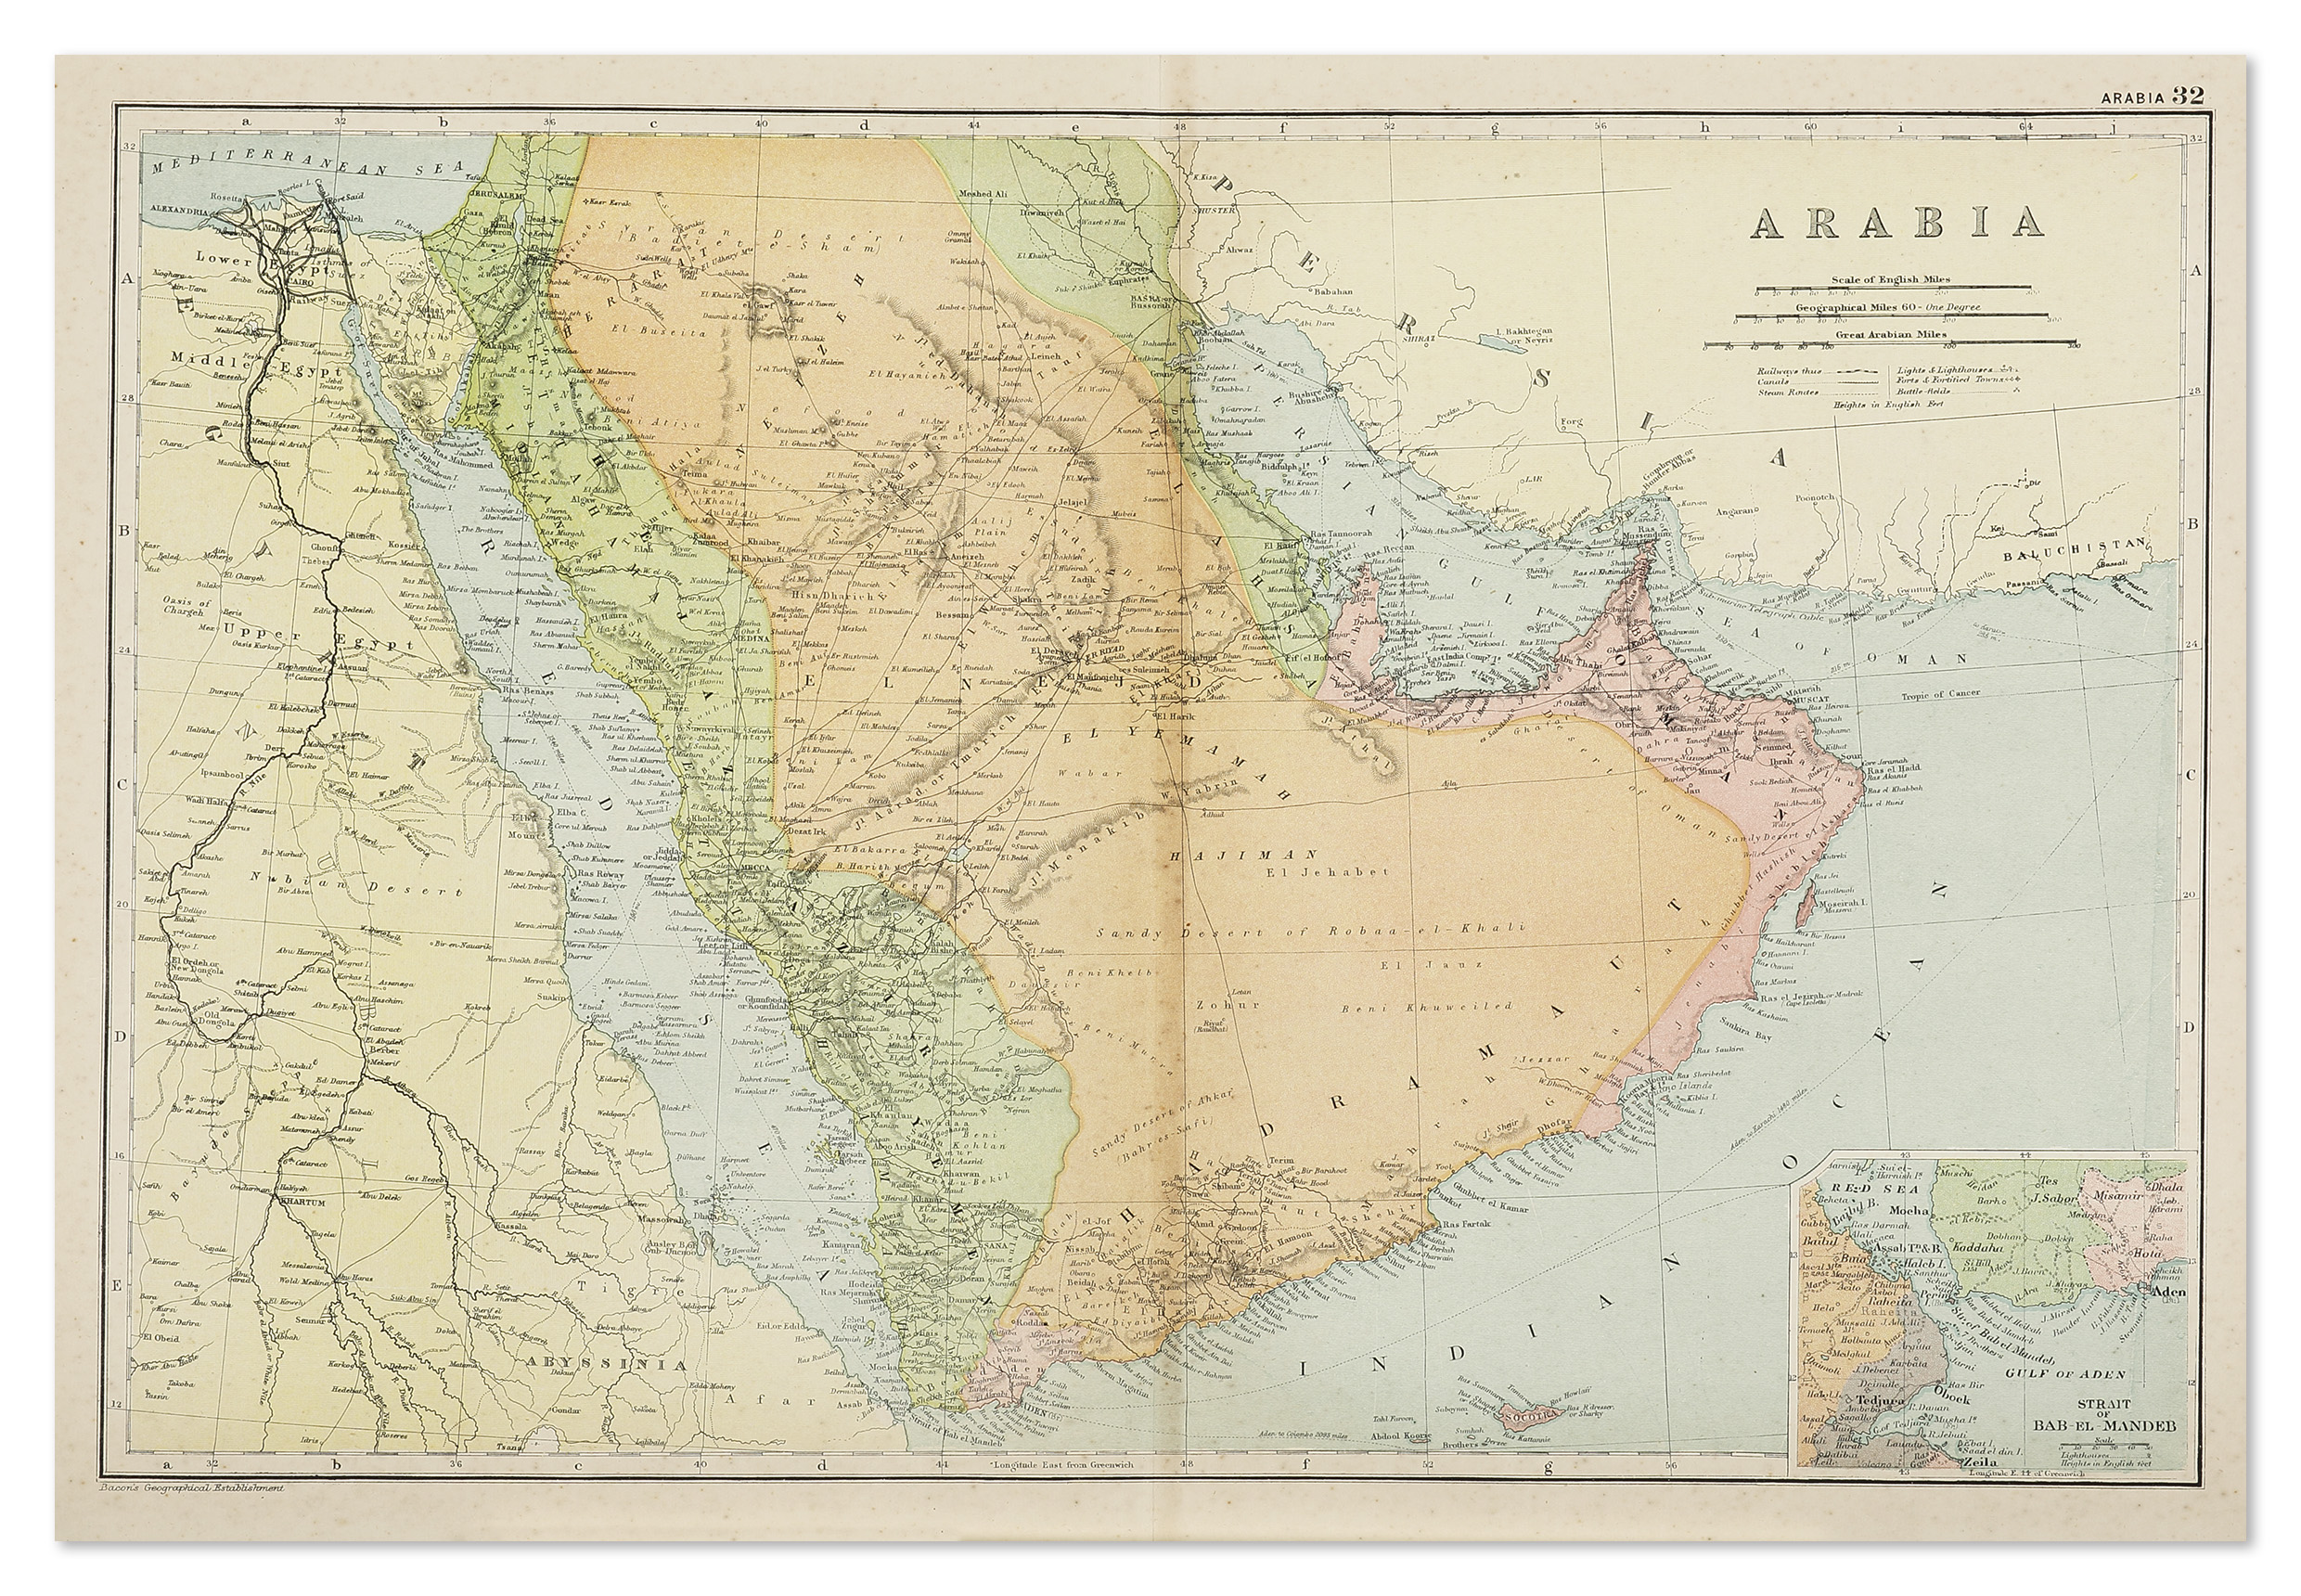 Arabia - Antique Print from 1898